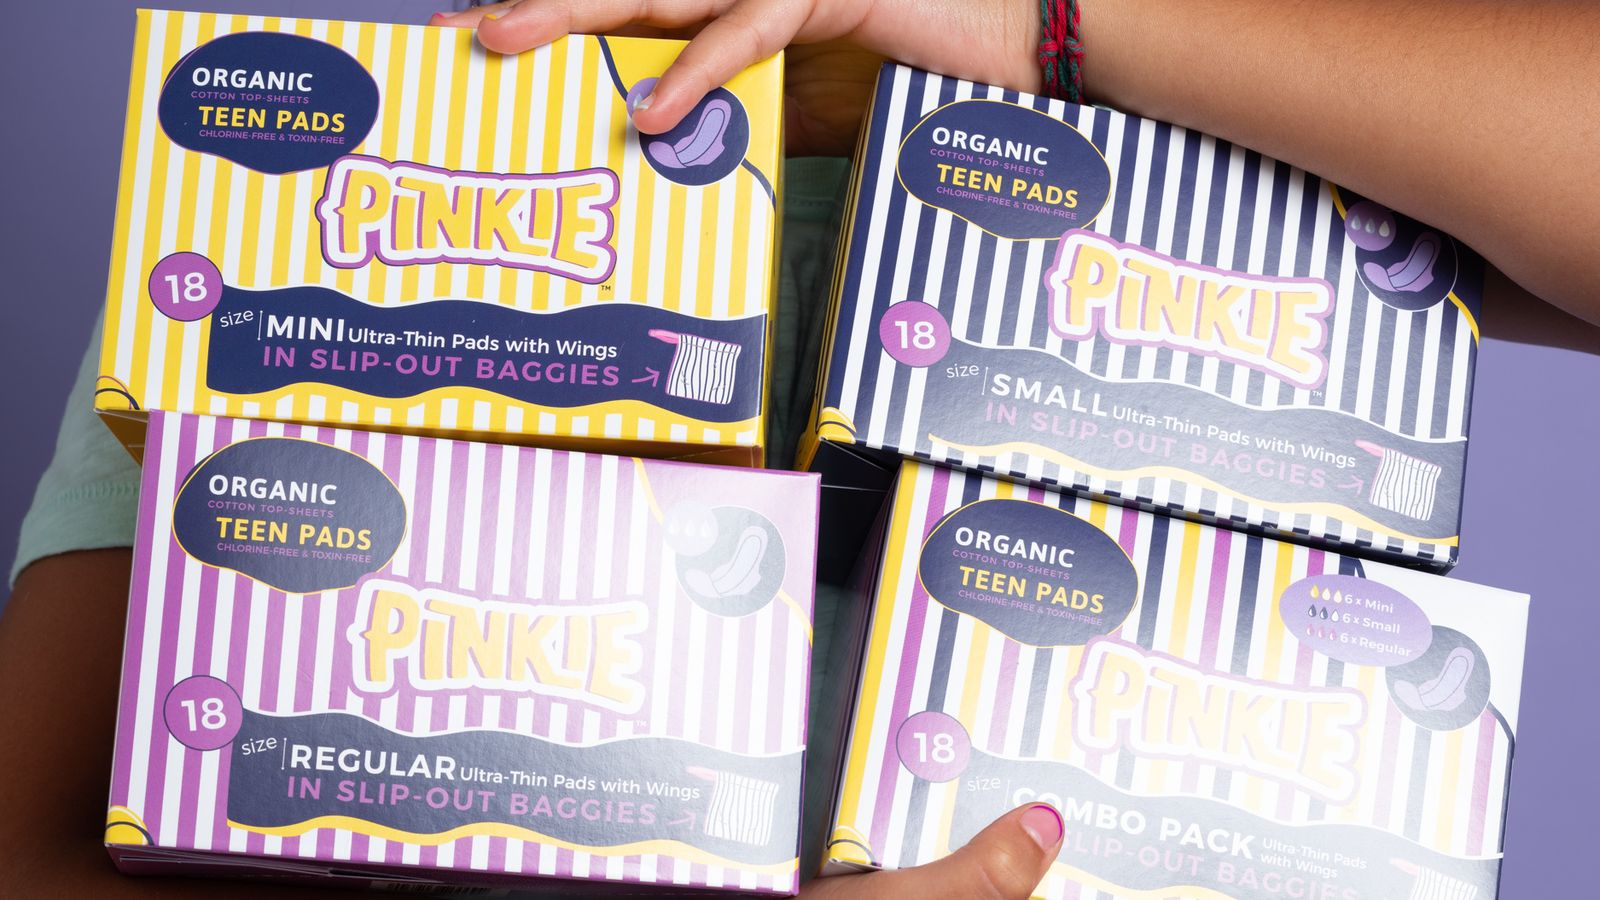 Pinkie period pads: Get a free box of organic pads at Target today -  Reviewed